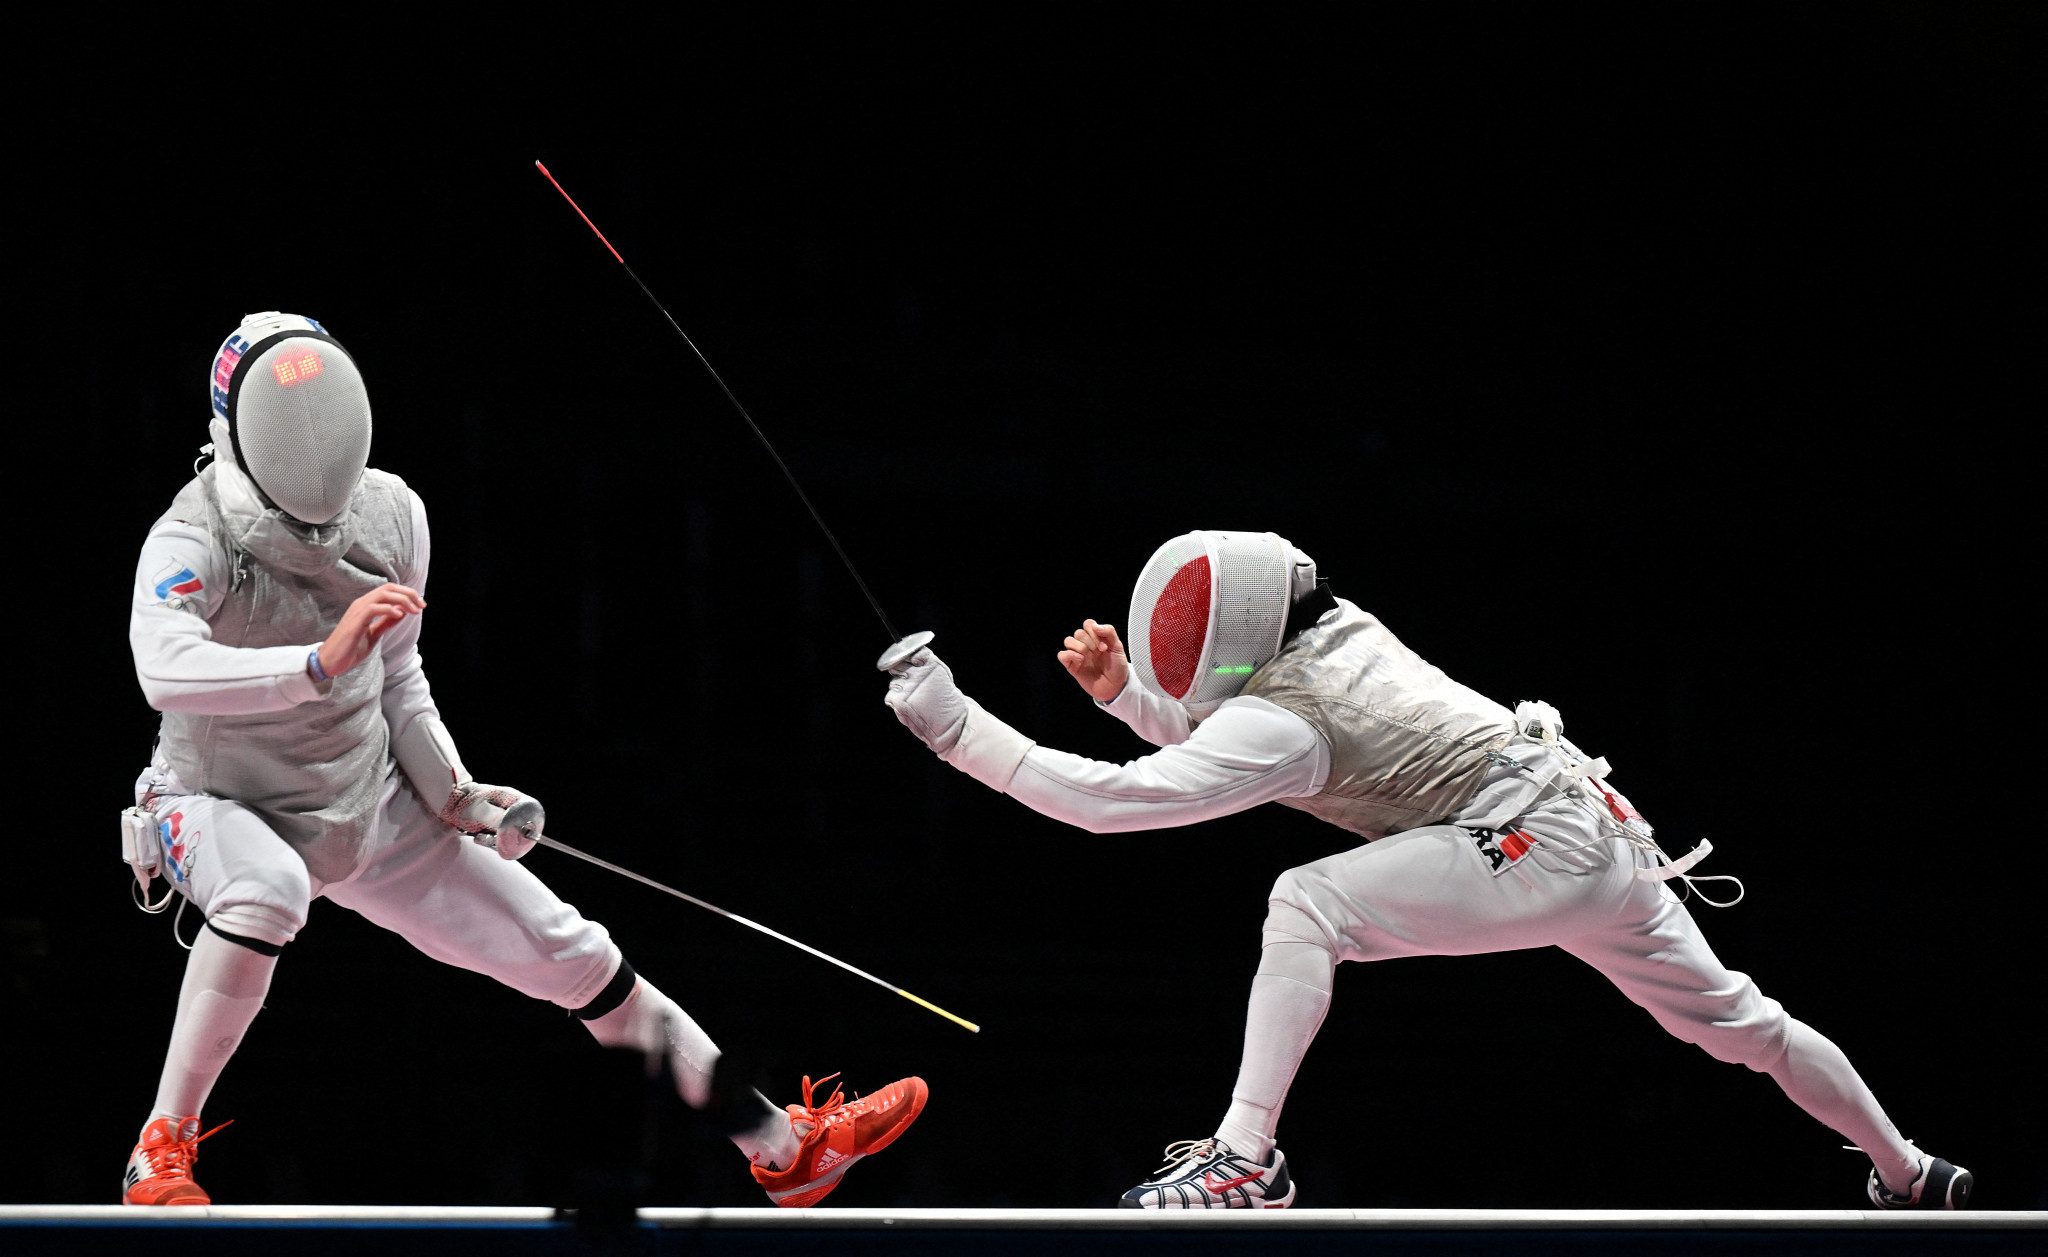 Fencing is France's most successful Olympic sport and one they will be looking towards for gold medals at Paris 2024 ©Getty Images